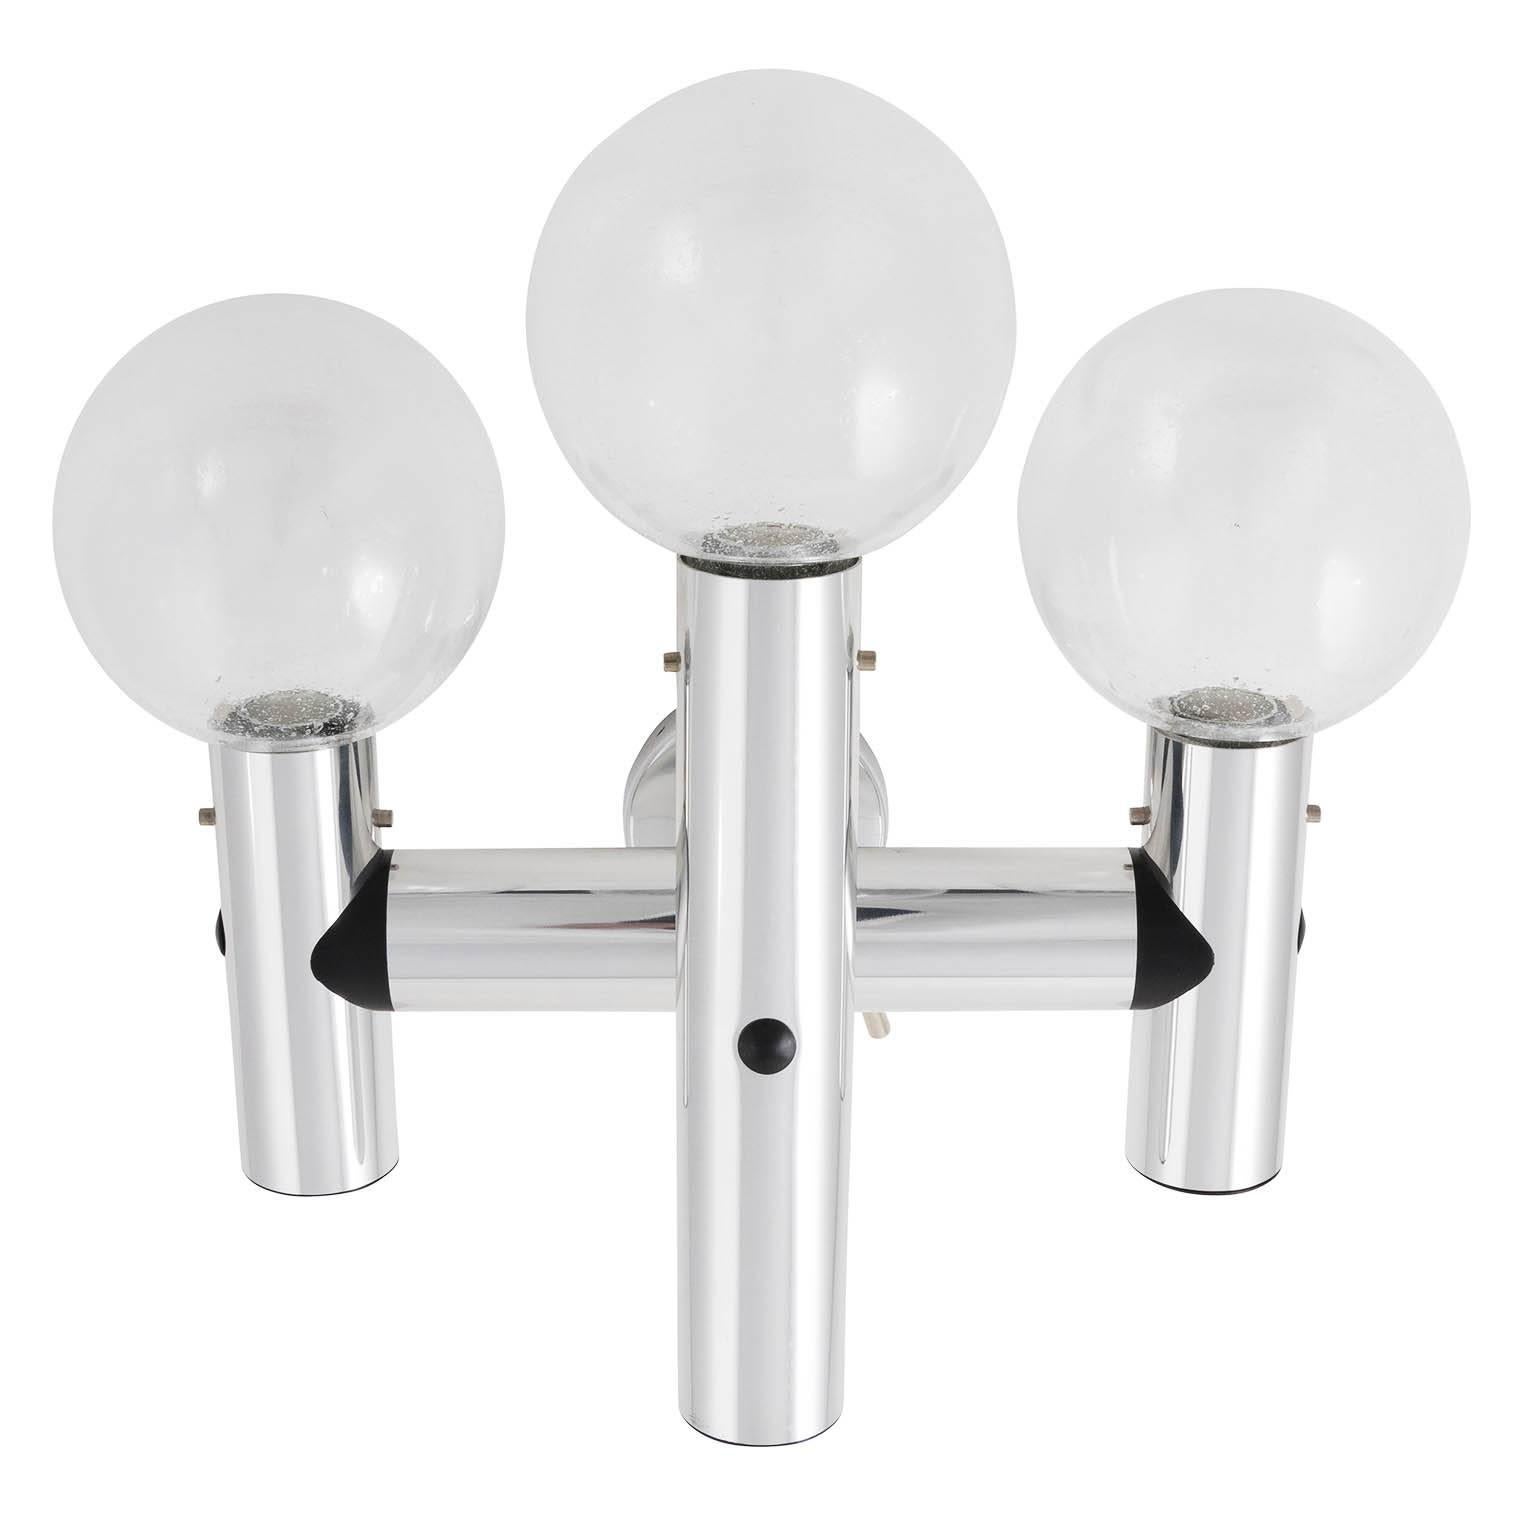 Ten (five pairs of) large J.T. Kalmar wall lights manufactured in Austria in Mid-Century, circa 1970 (late 1960s or early 1970s).
They are made of polished aluminum and handblown bubble glass lampshades. Each sconce takes three small screw base